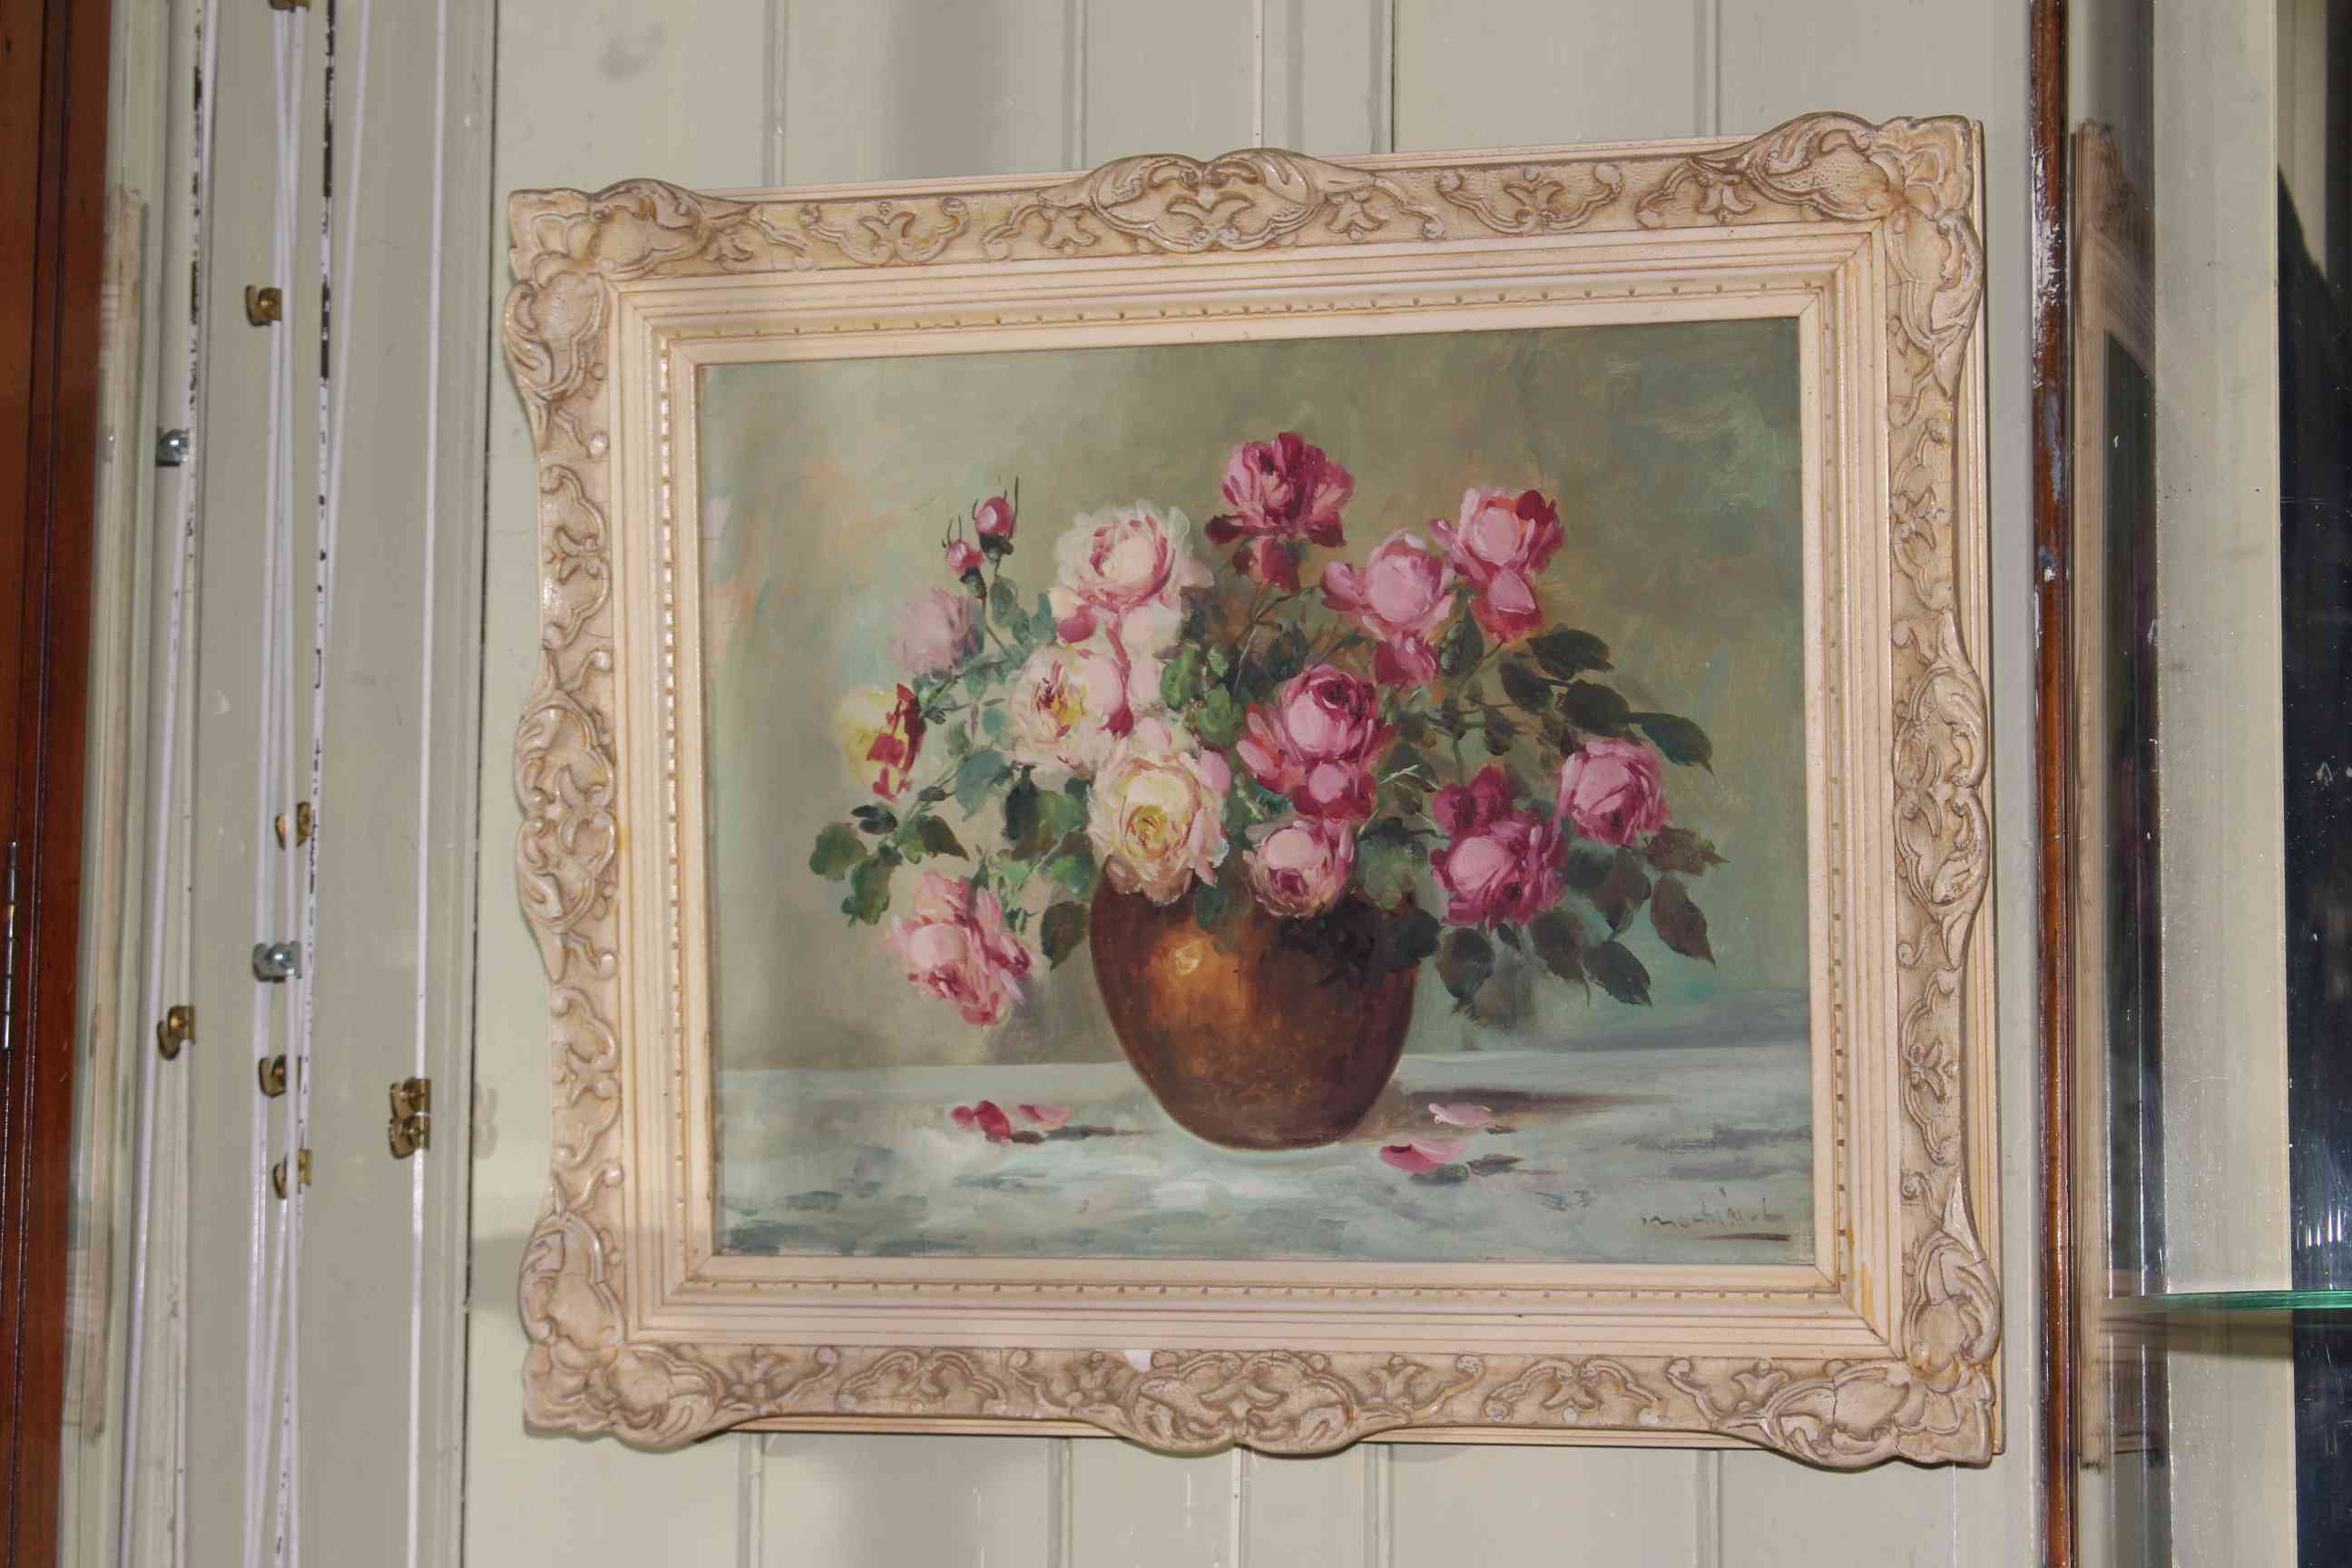 Monteith, Still Life Vase of Flowers, oil on canvas, signed lower right, 39cm by 48.5cm.